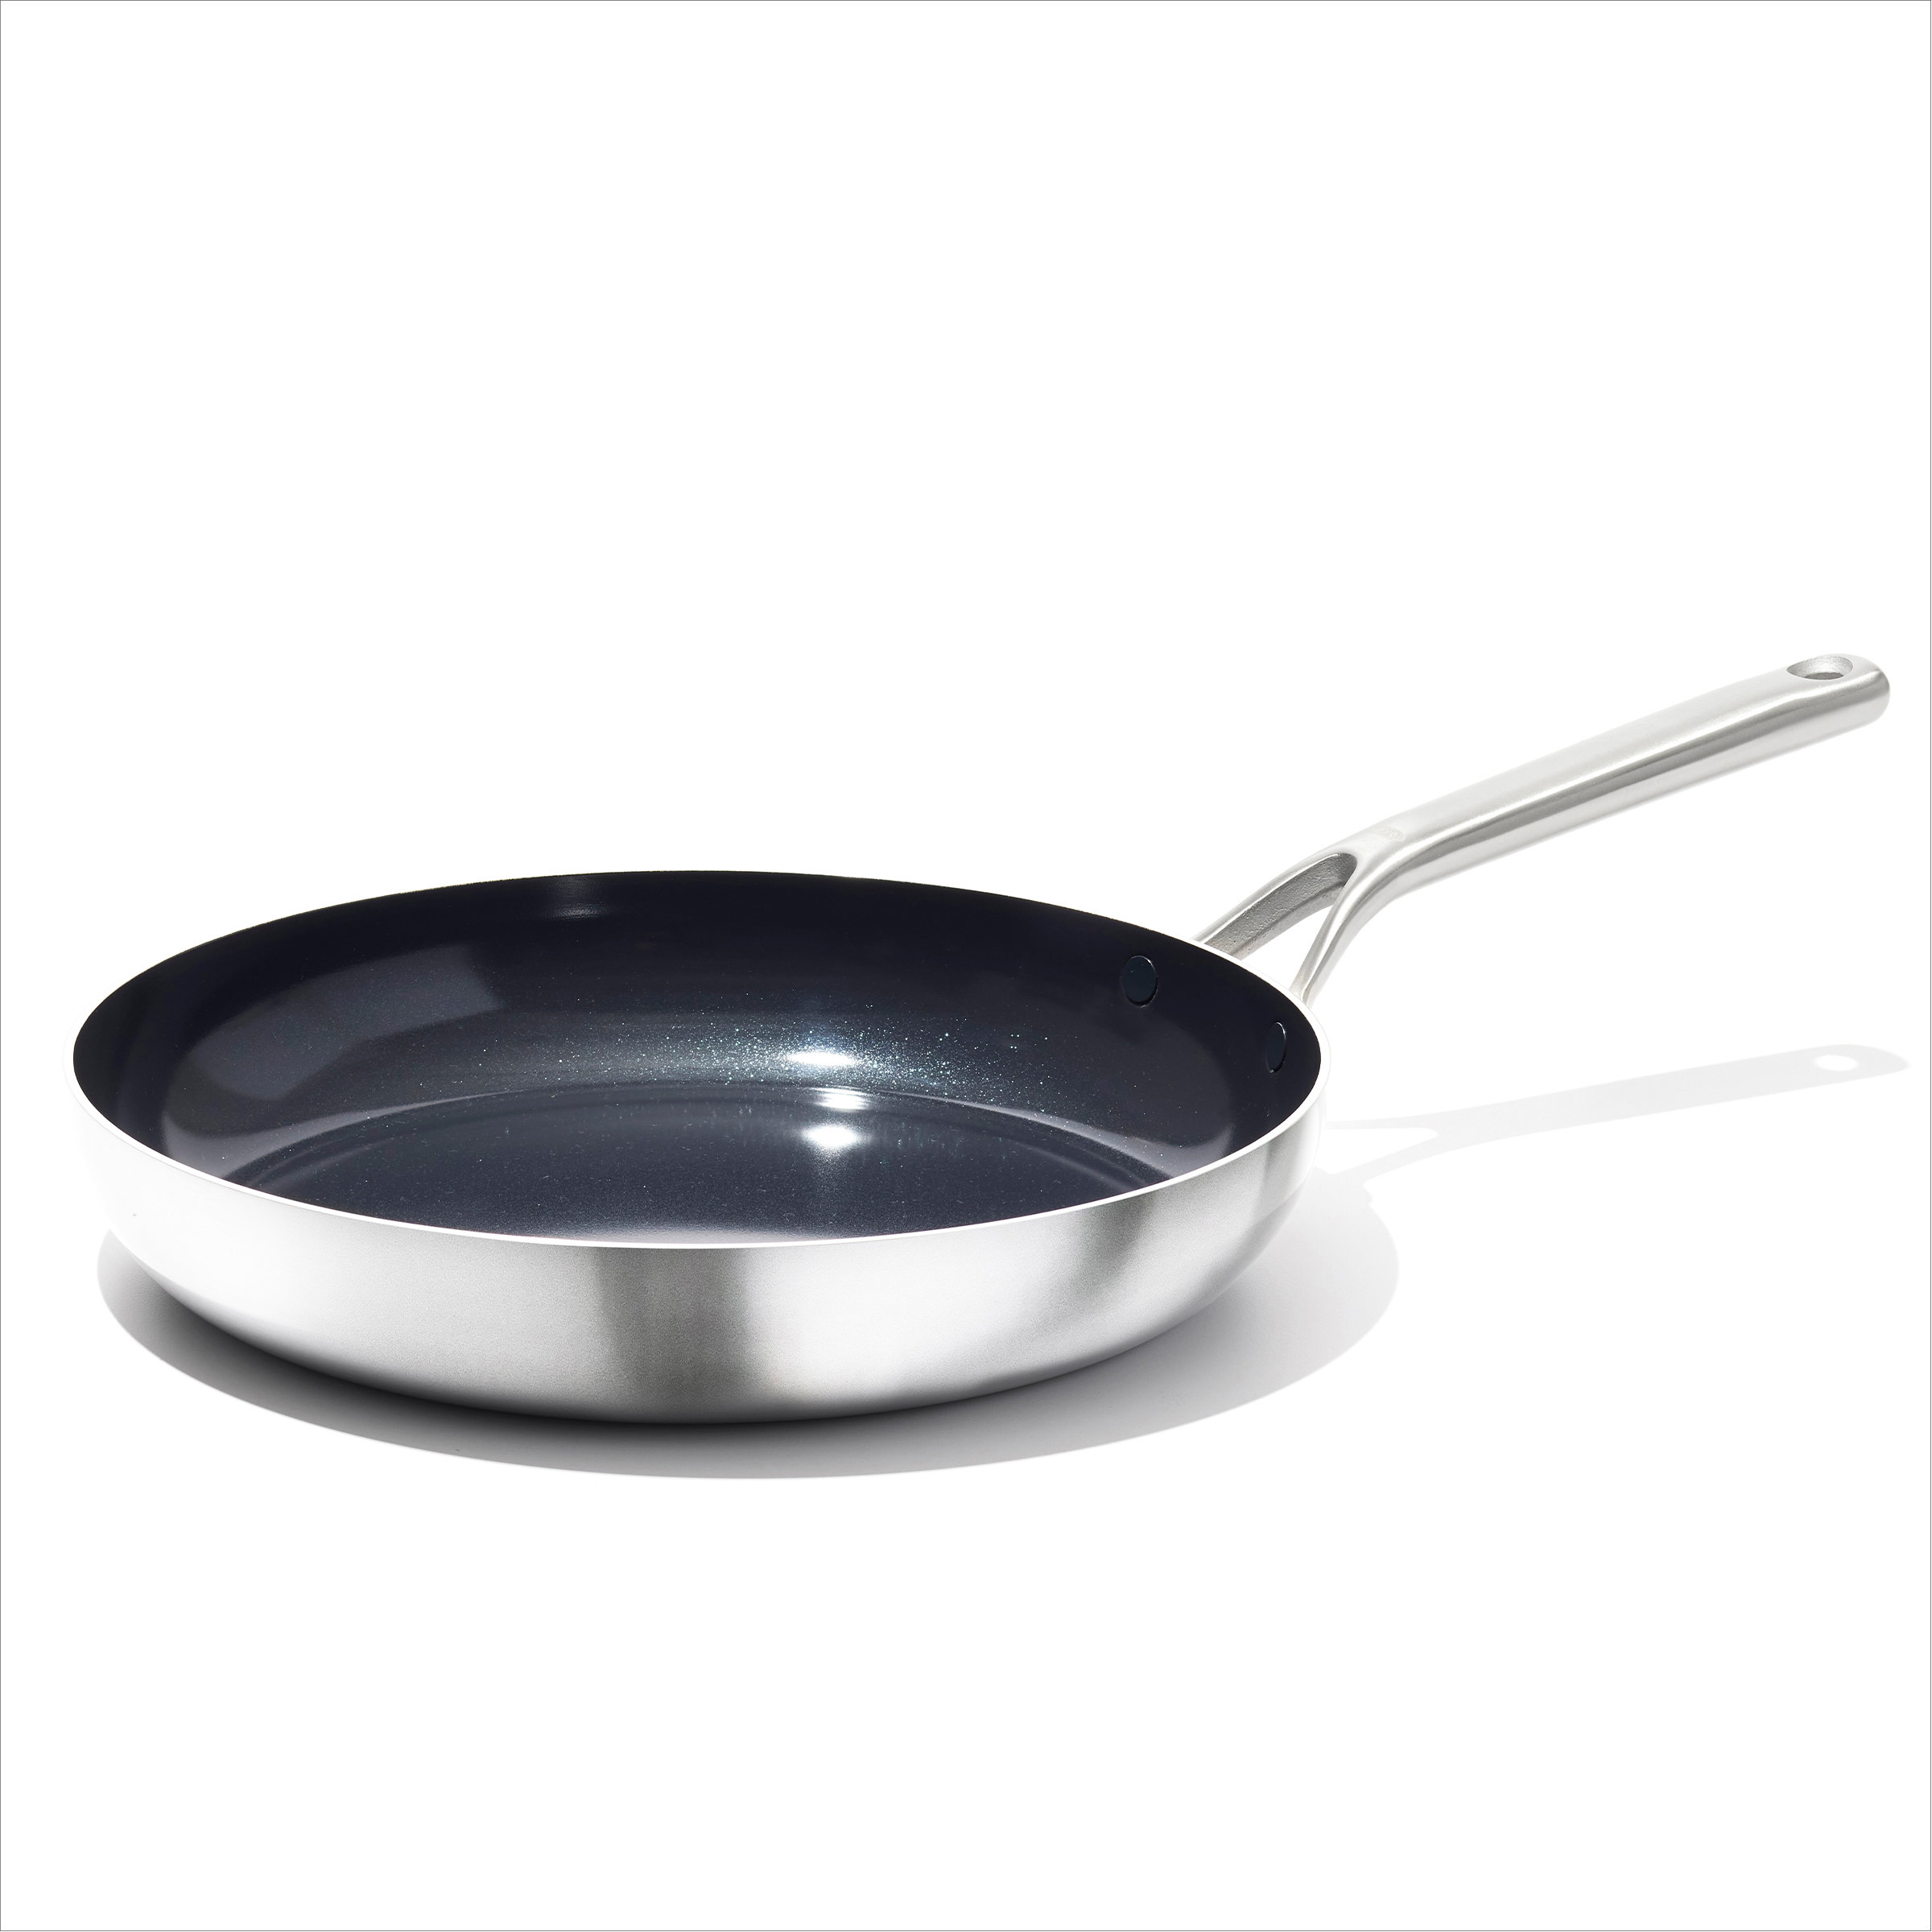 All-Clad All-Clad D3 Tri-Ply Nonstick Stainless-Steel Fry Pan - 10.00 Fry Pan